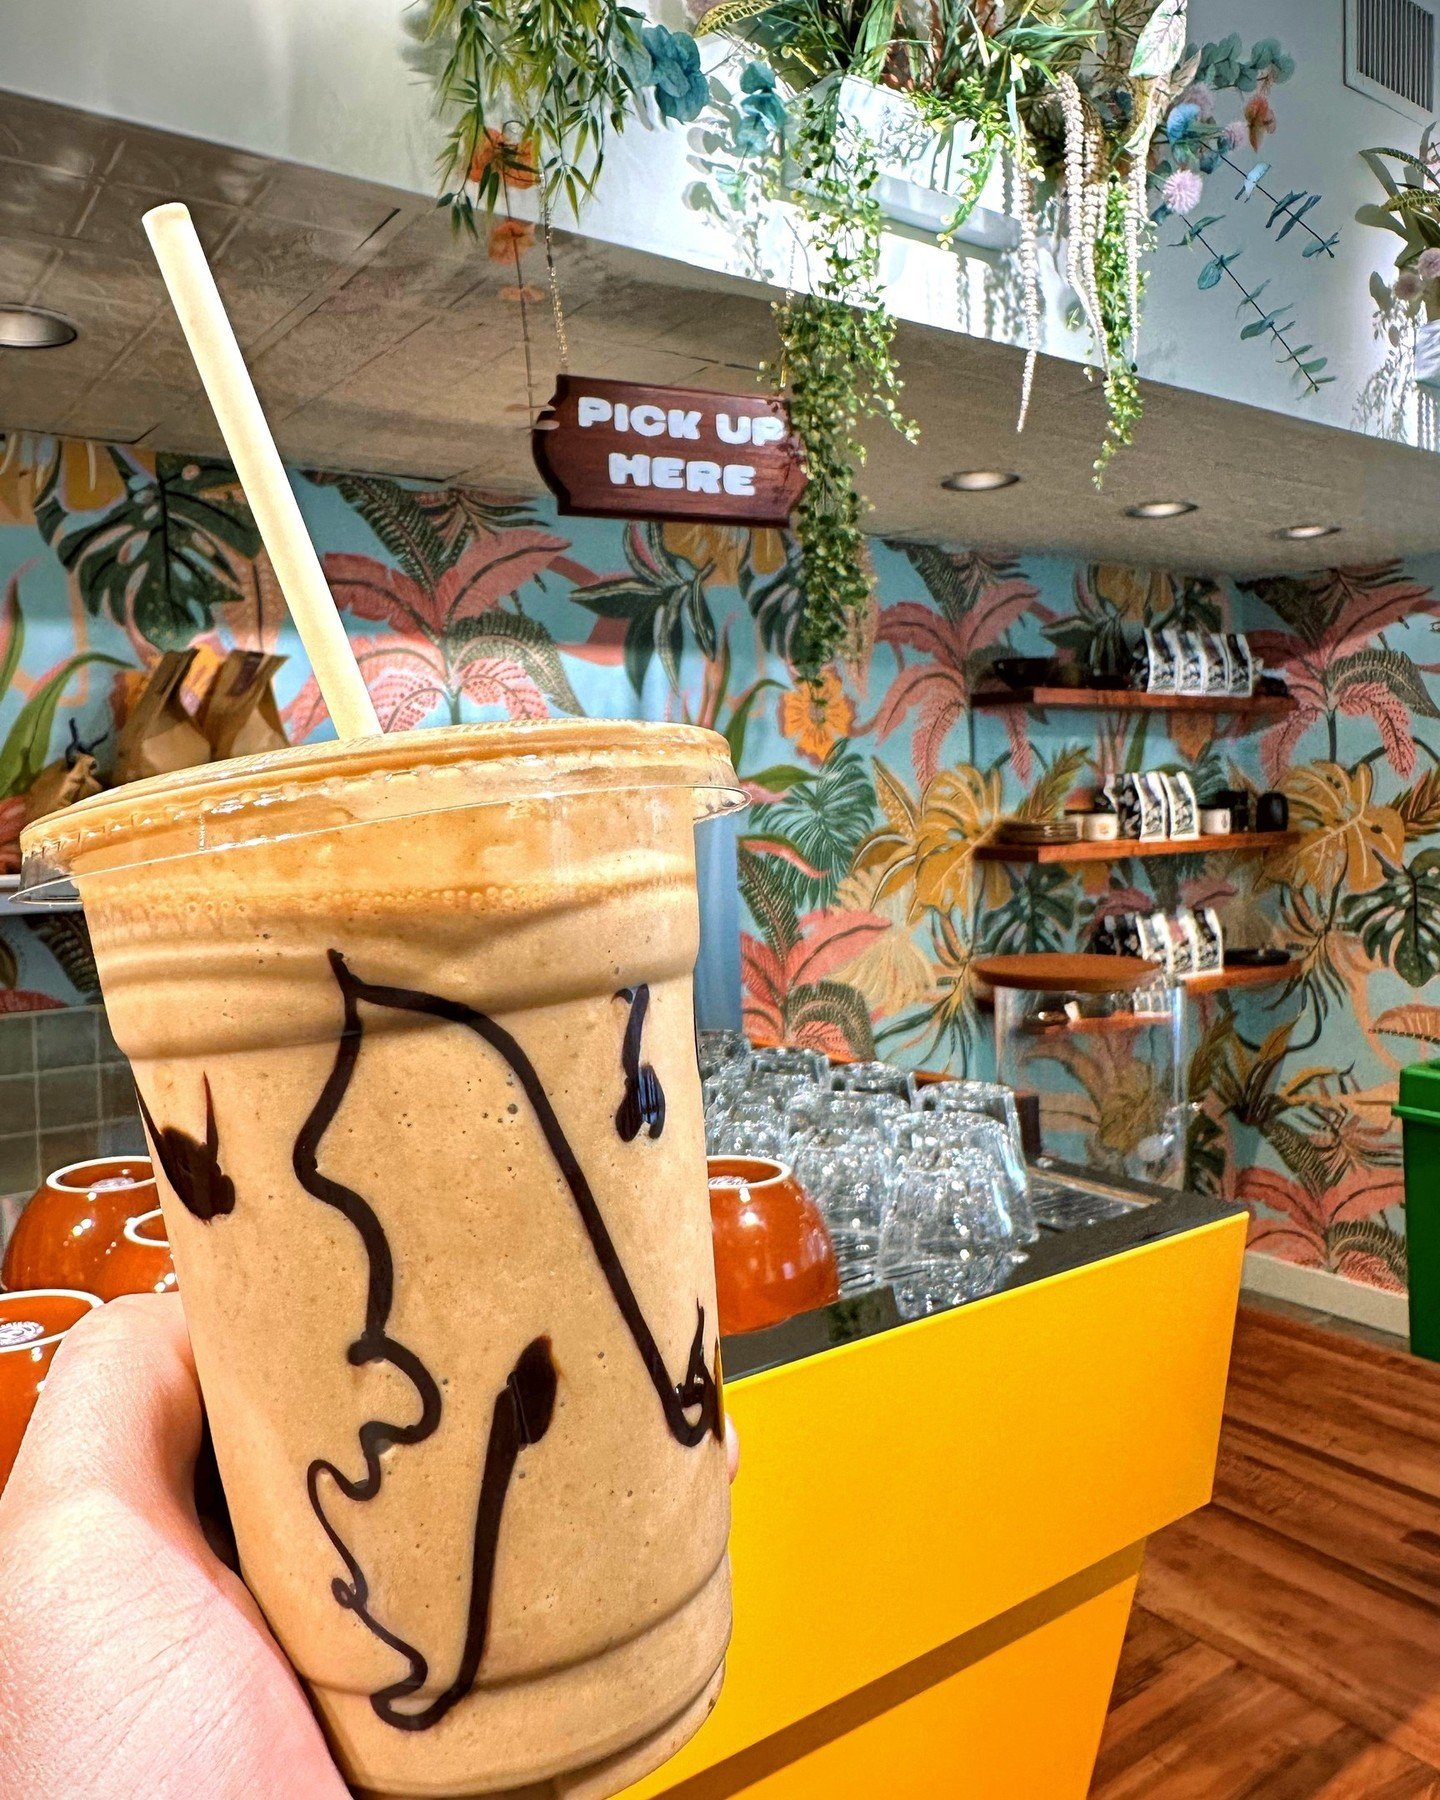 ✹ NEW SMOOTHIE SPECIAL ✹⁠
⁠
Named after its creator, try our new &quot;MAXX'D OUT&quot; smoothie creation. Made with cold brew coffee, peanut butter, Nutella, banana, almond milk, and a mocha drizzle! Ummm... yes, please! ⁠
⁠
Get your coffee fix AND 